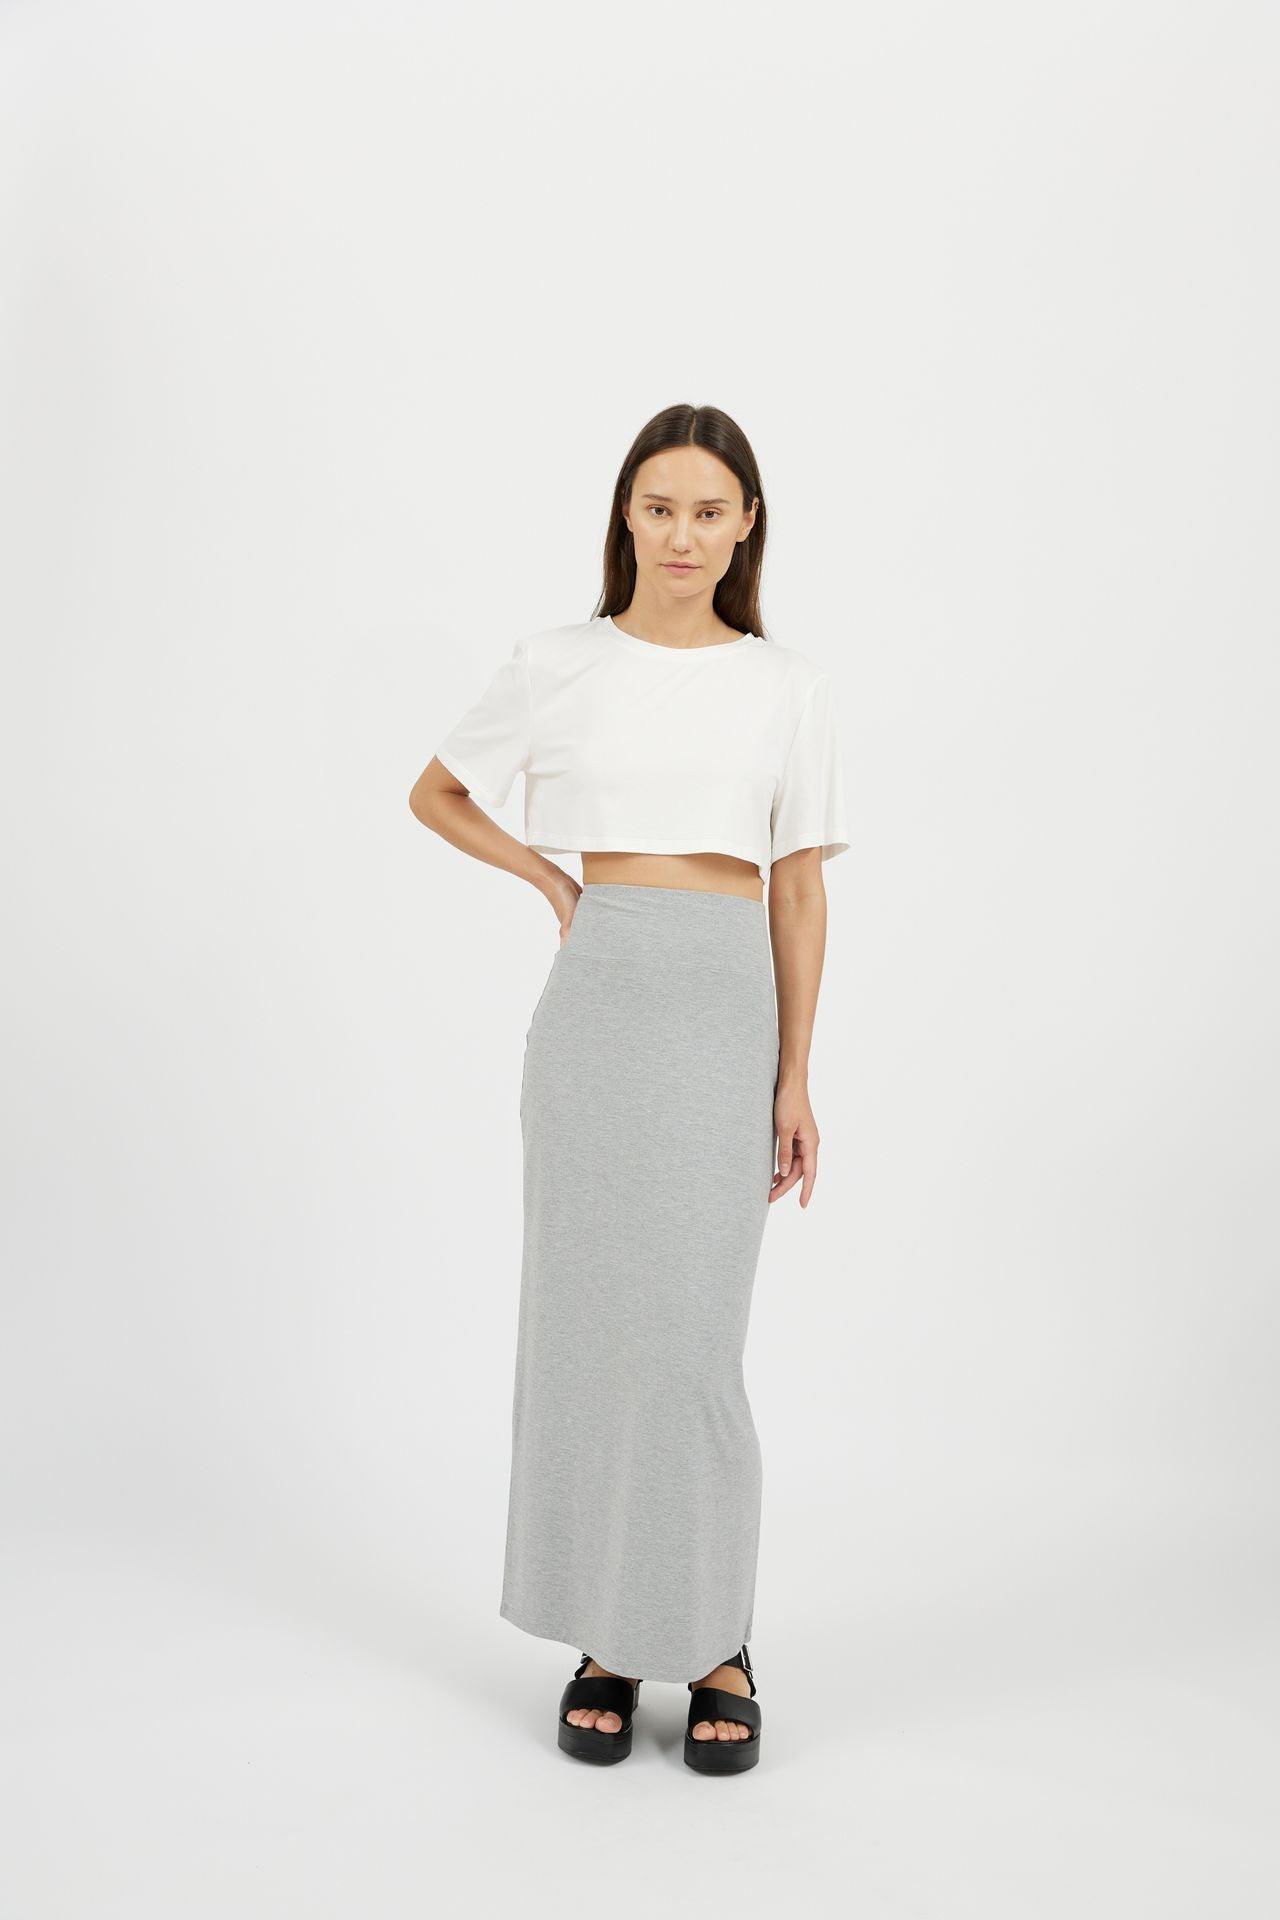 High Waisted Pencil Labeled Skirt Skirts | Not 